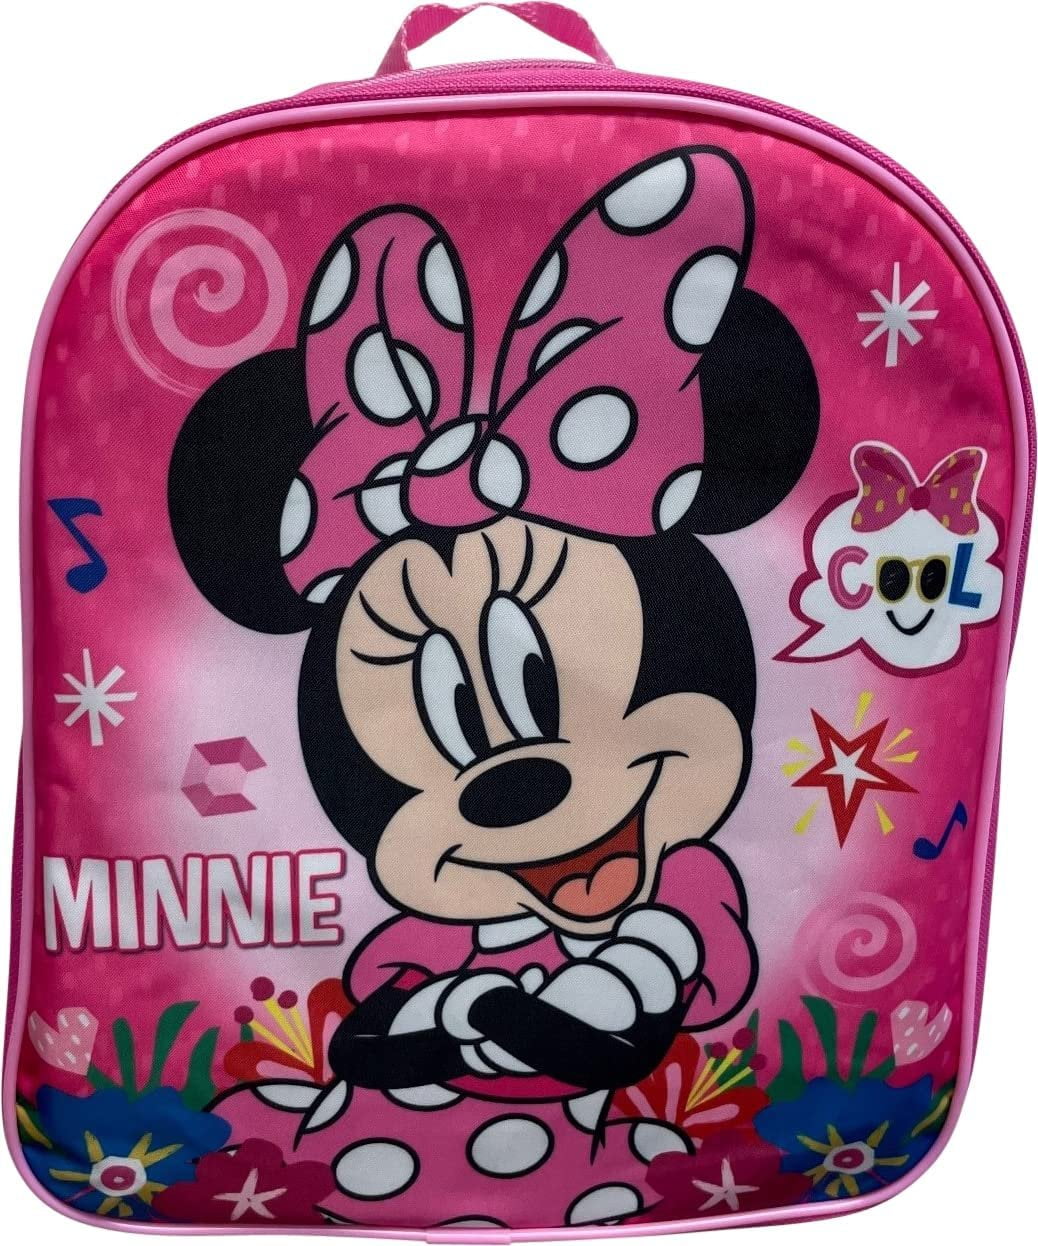 Disney Minnie Mouse Backpack for Girls Toddlers Kids ~ Bundle Includes 12  Minnie Preschool Toddler Backpack with Ears, Bow and Magic Reversible